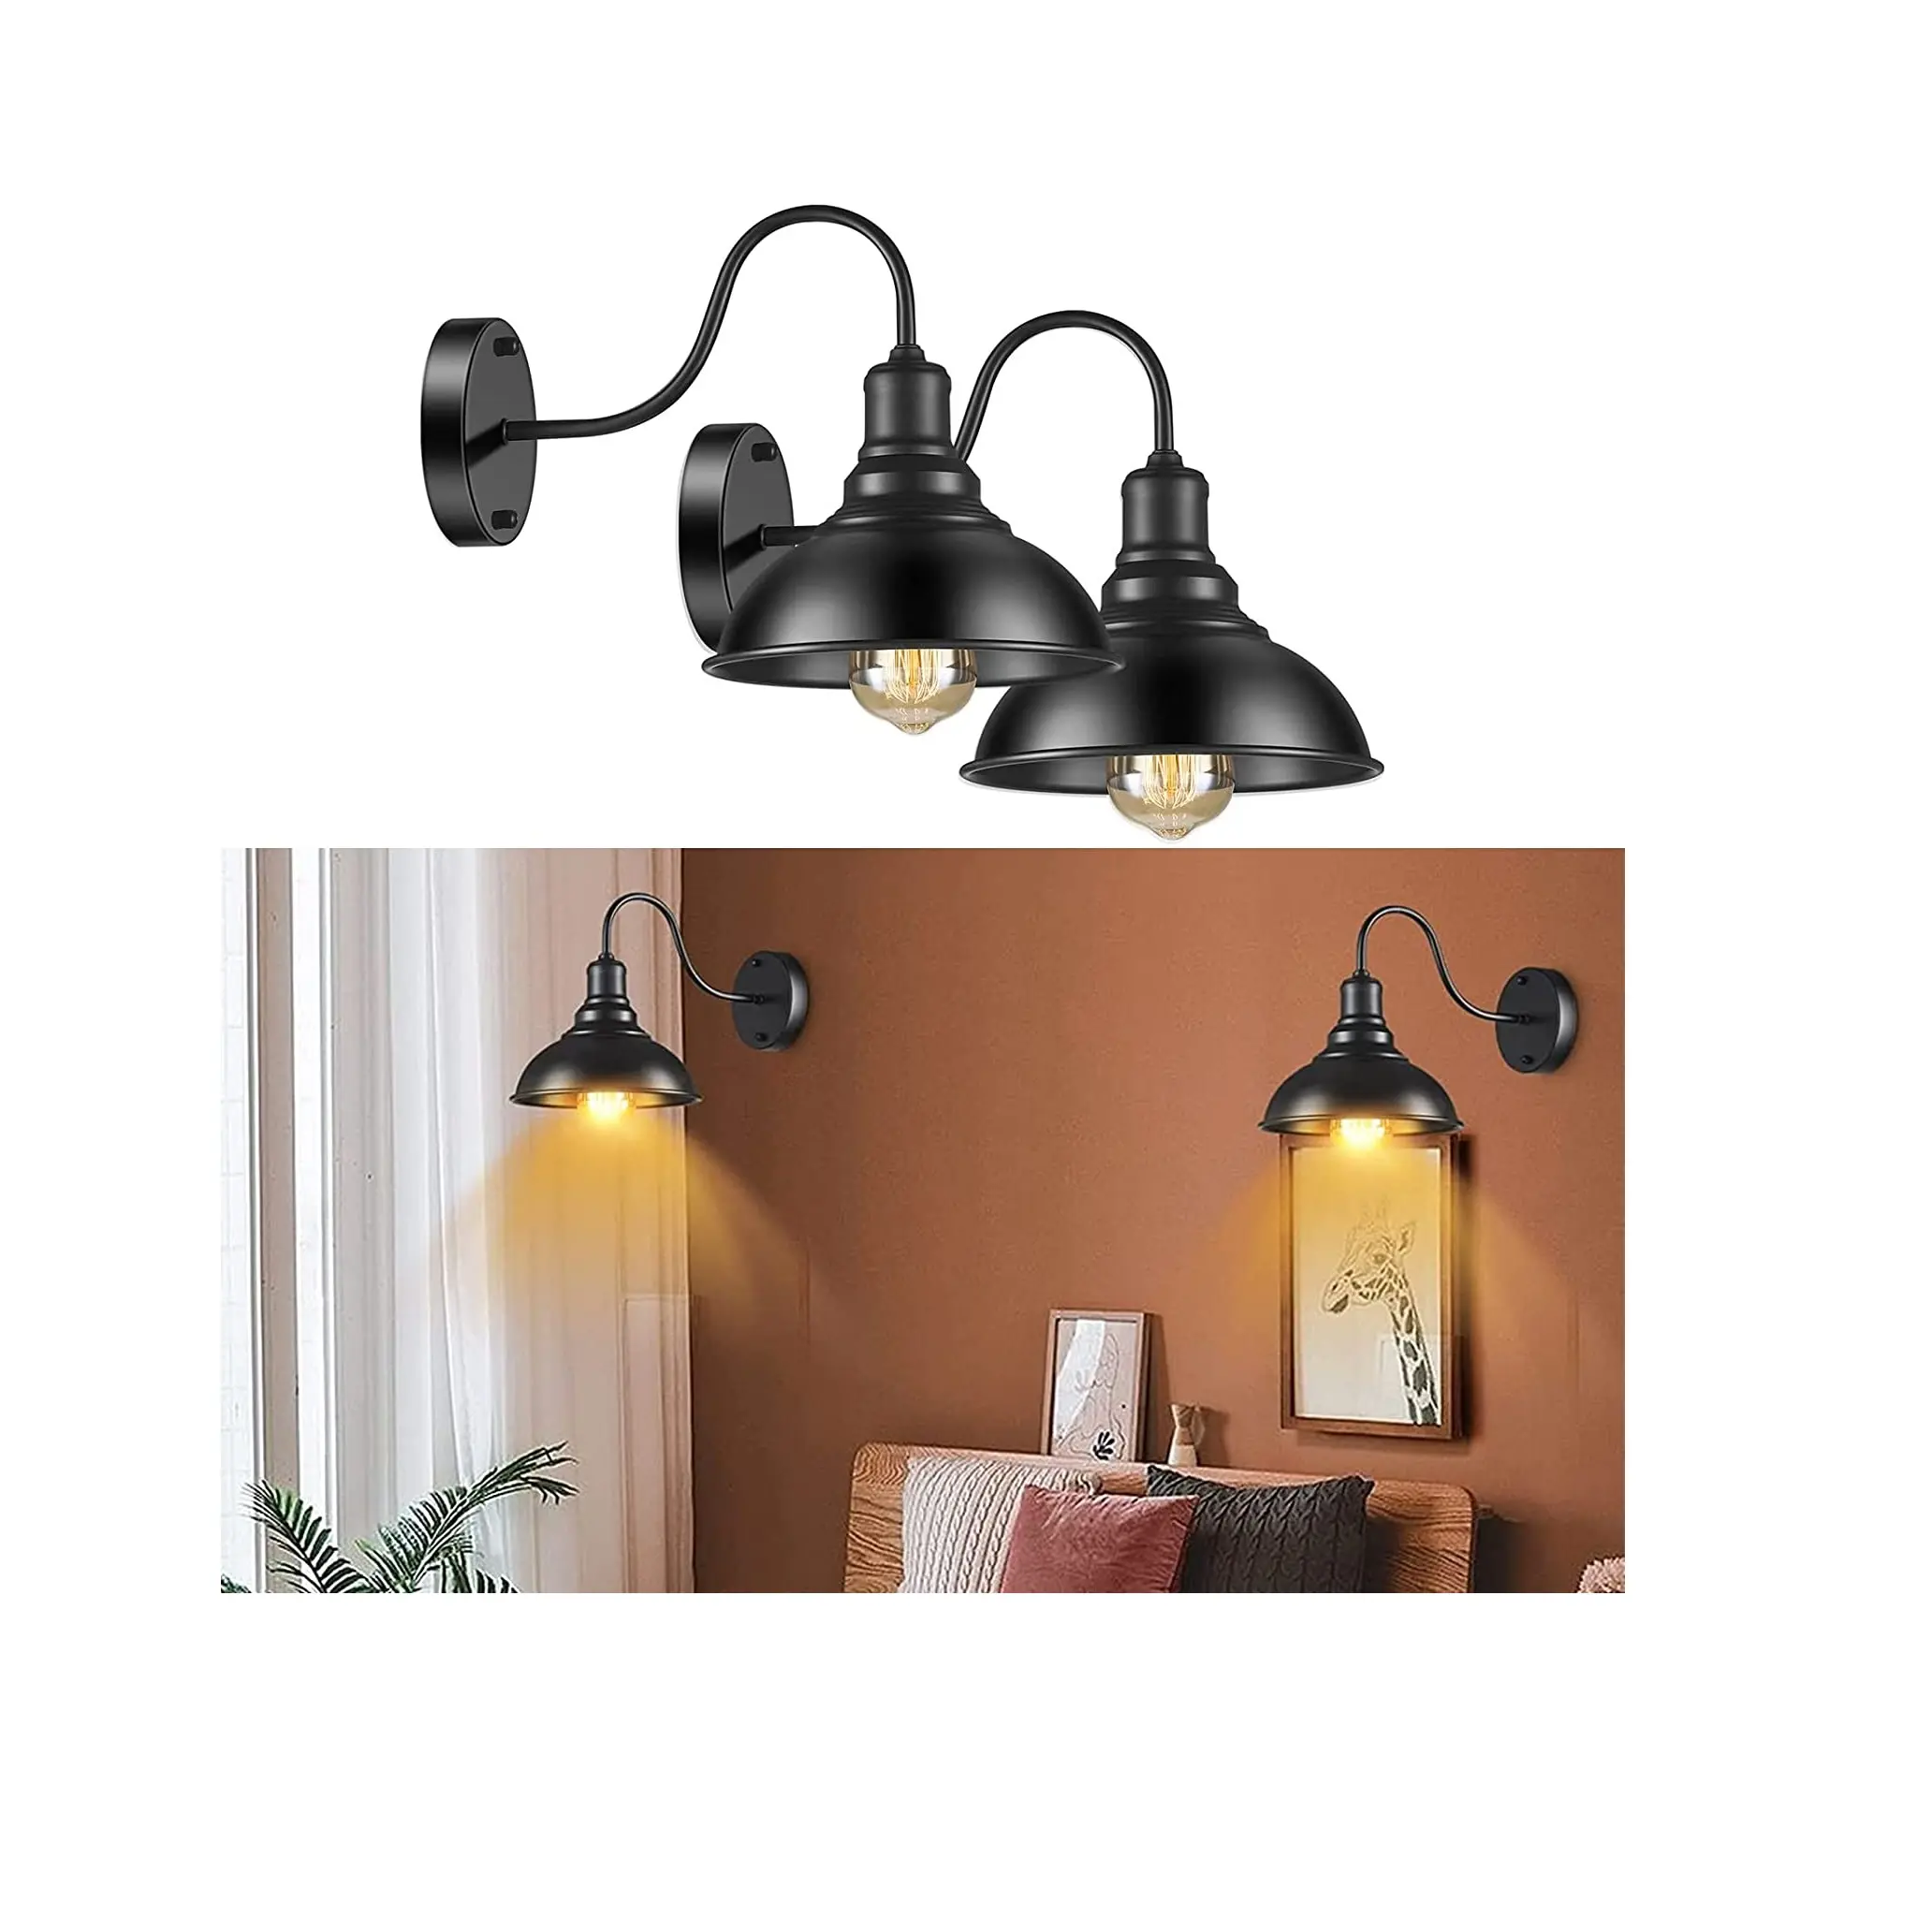 Industrial Black Wall Sconces Gooseneck Wall Sconces Lighting Wall Mount Lamp Fixtures for Barn Porch Bathroom